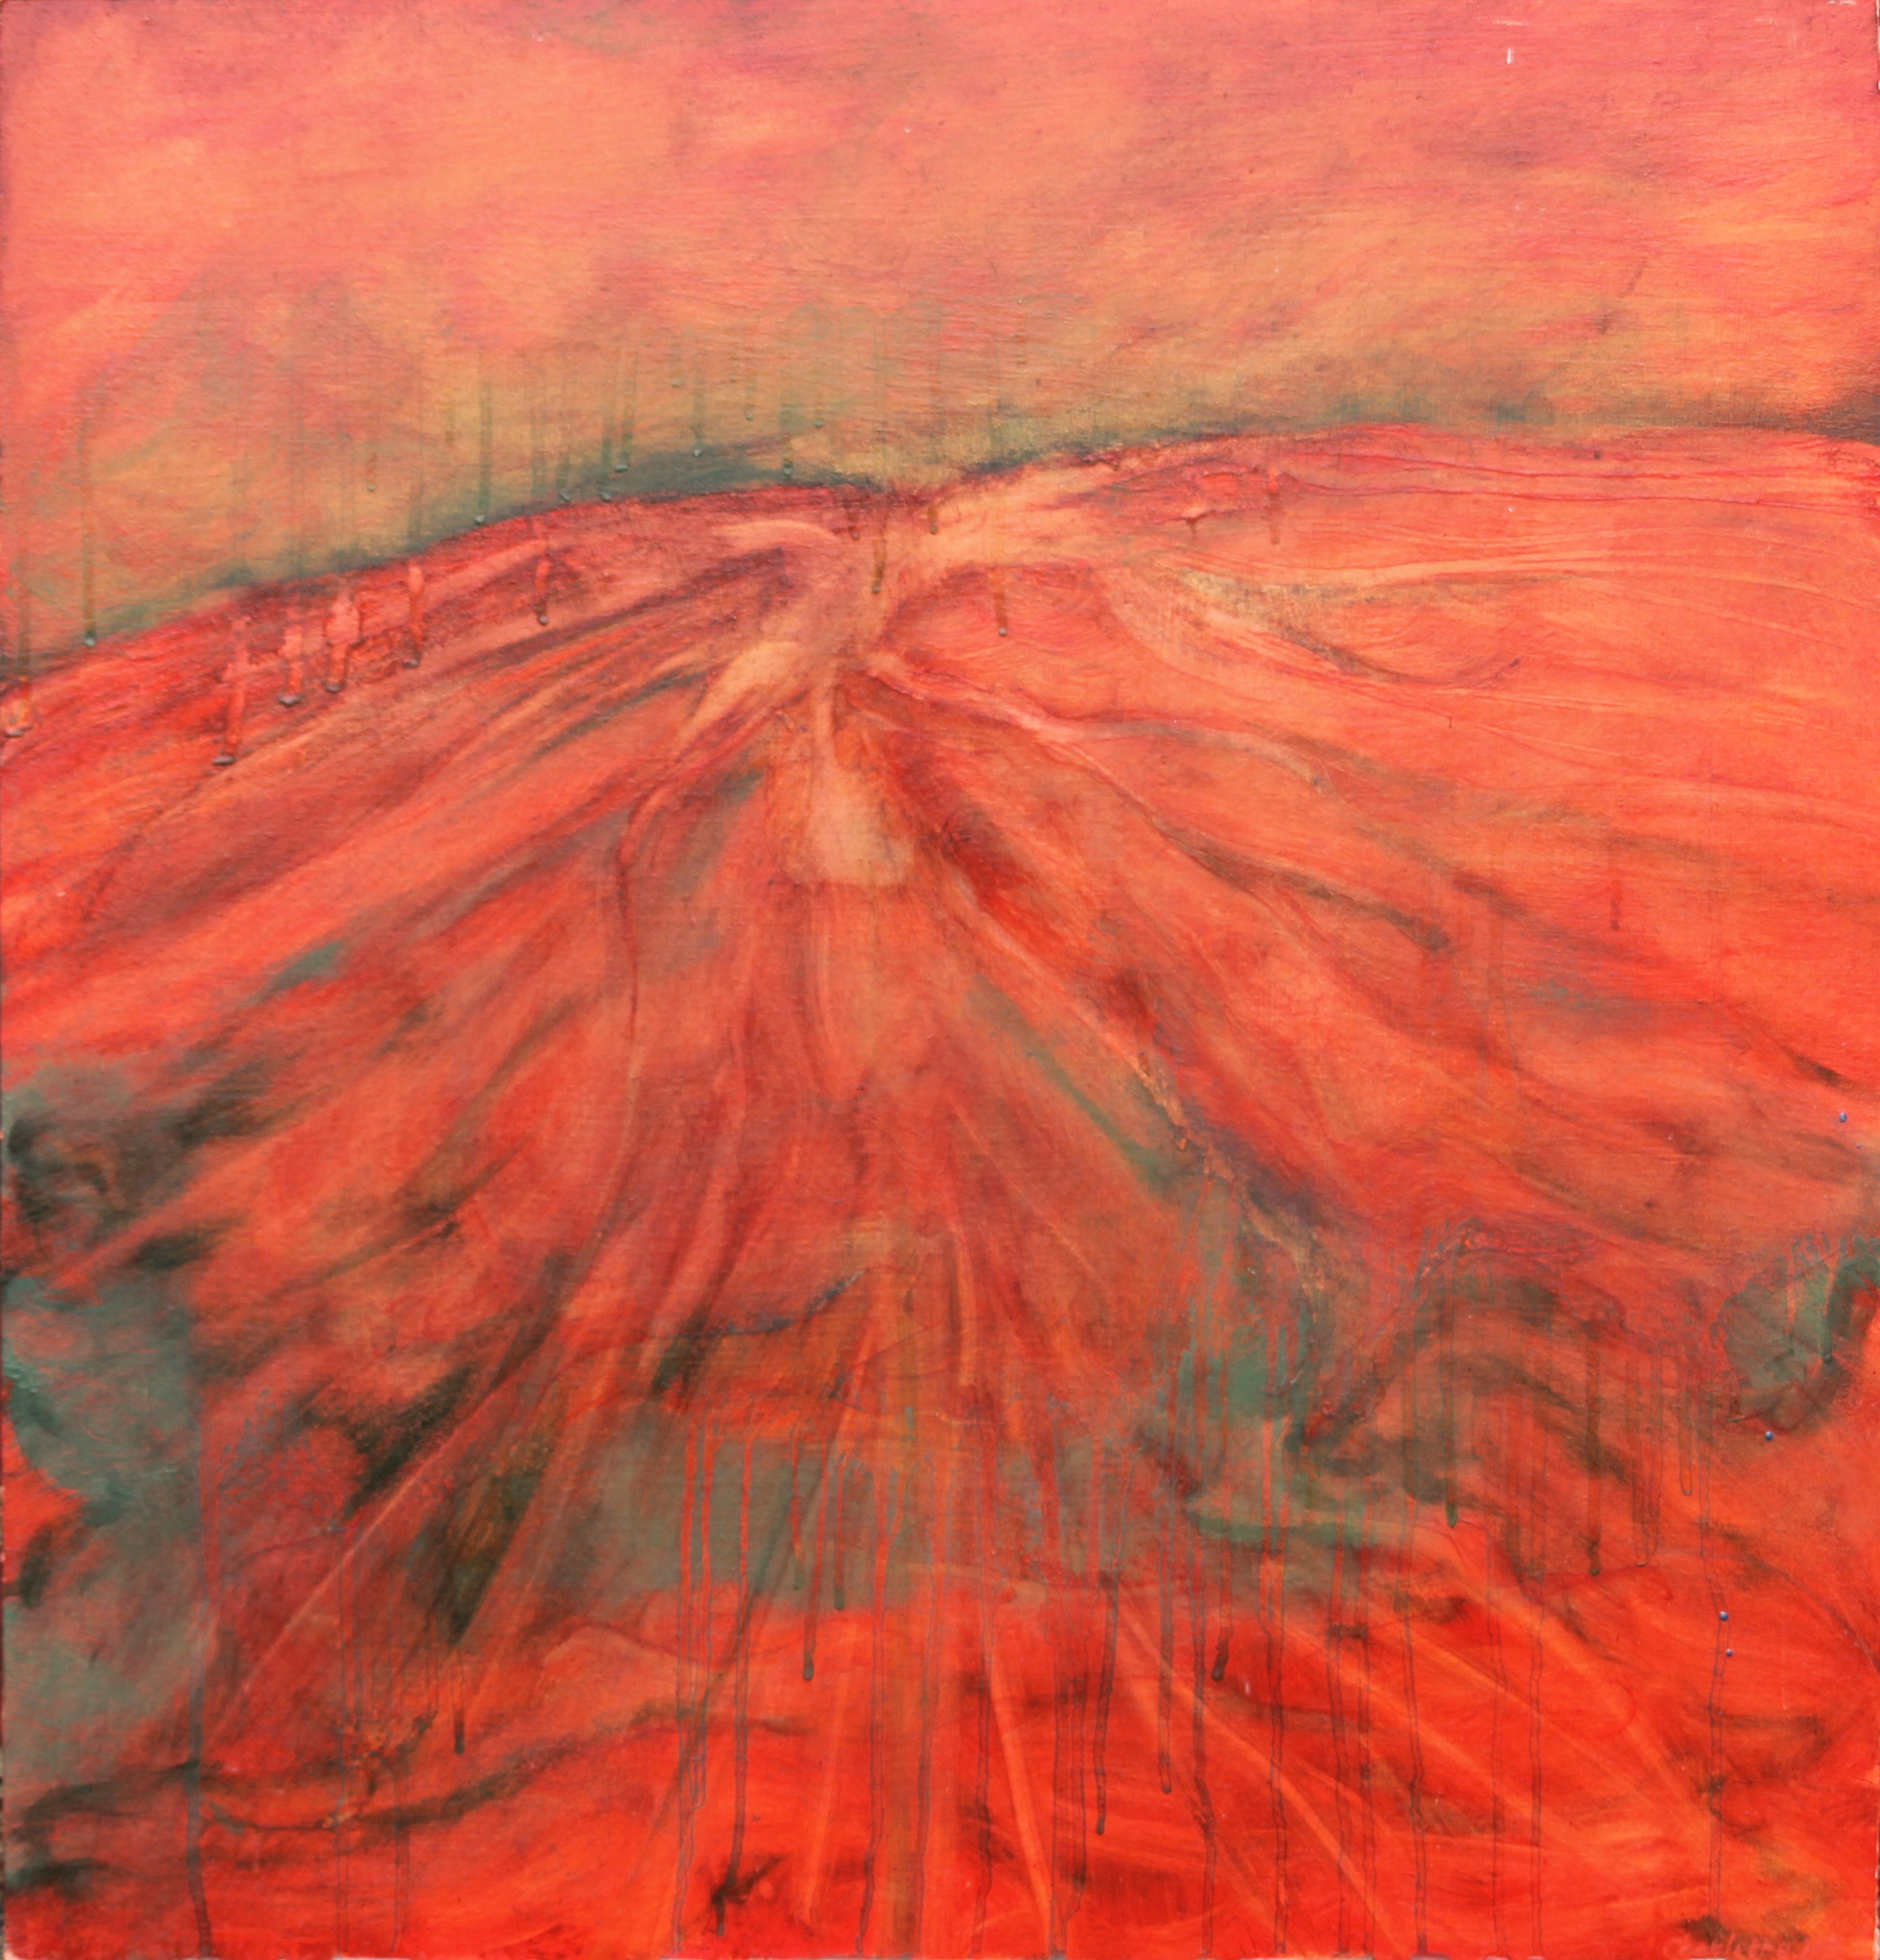 A red, abstract painting with green veins radiating out form the centre point of a blurry horizon line. The painting is covered in tiny red and green dots like freckles.